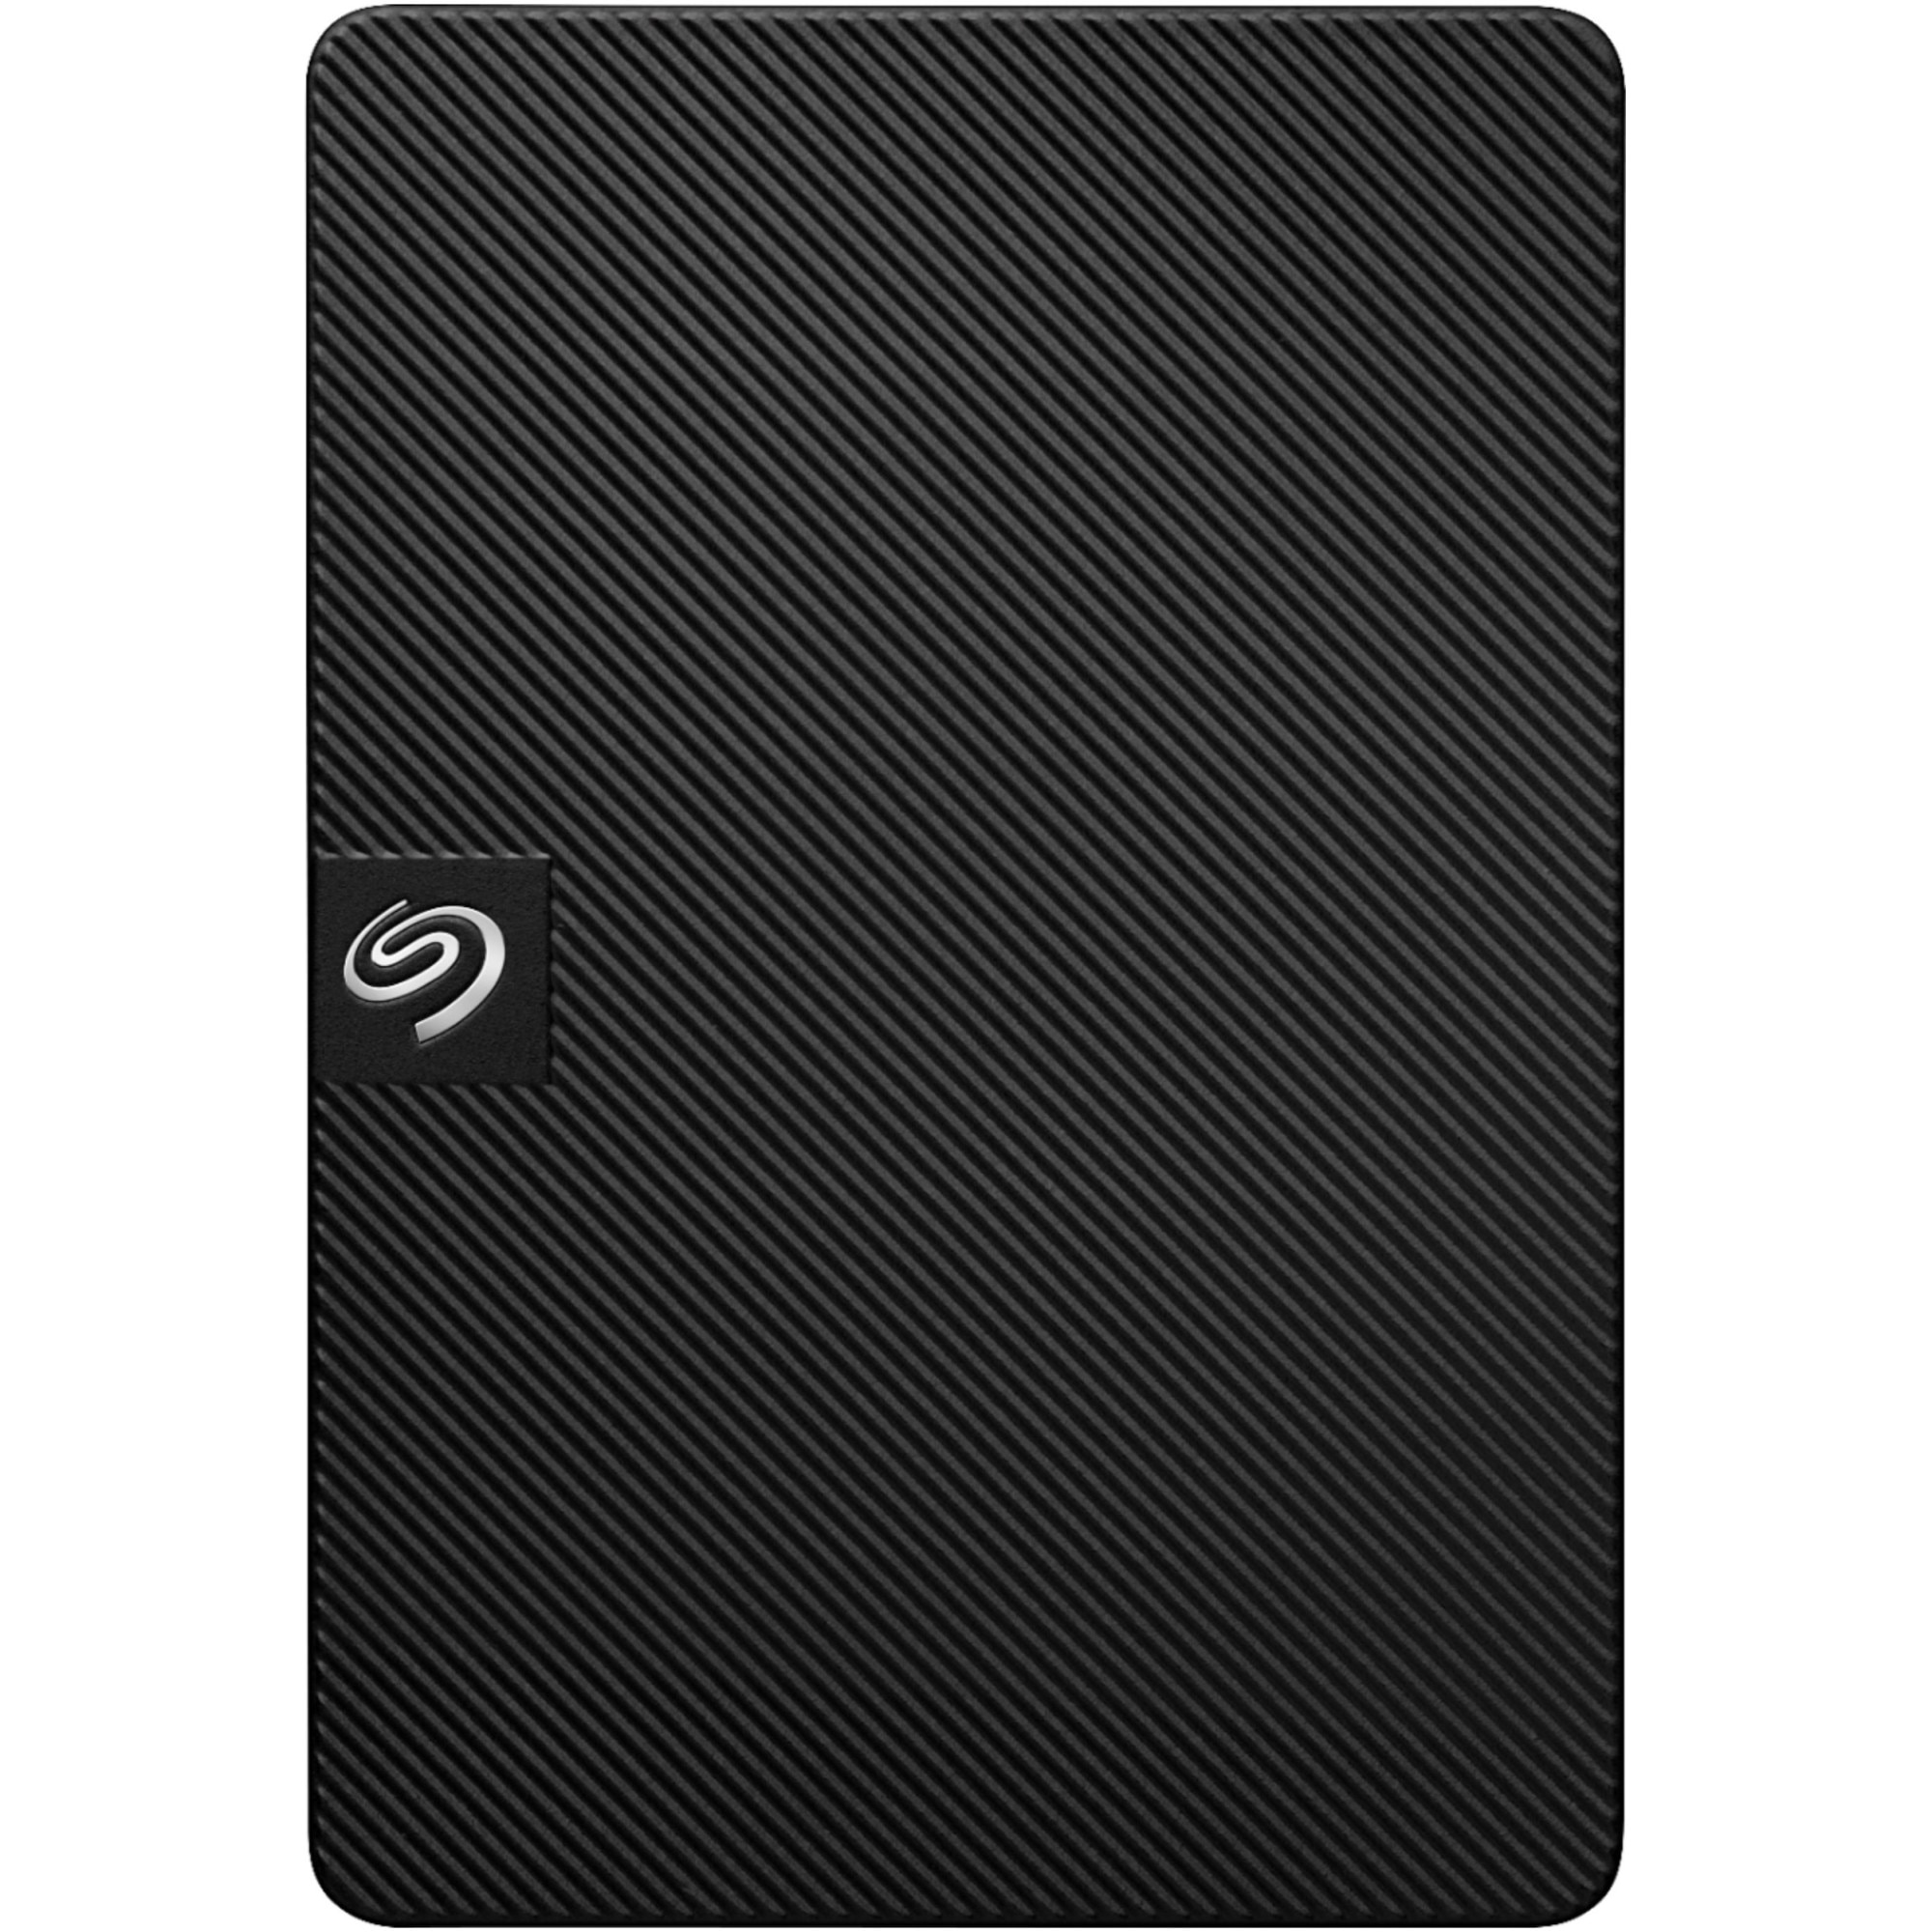 Raise yourself physically snap HDD extern Seagate Expansion Portable, 5TB, 2.5", USB 3.0, Negru - eMAG.ro